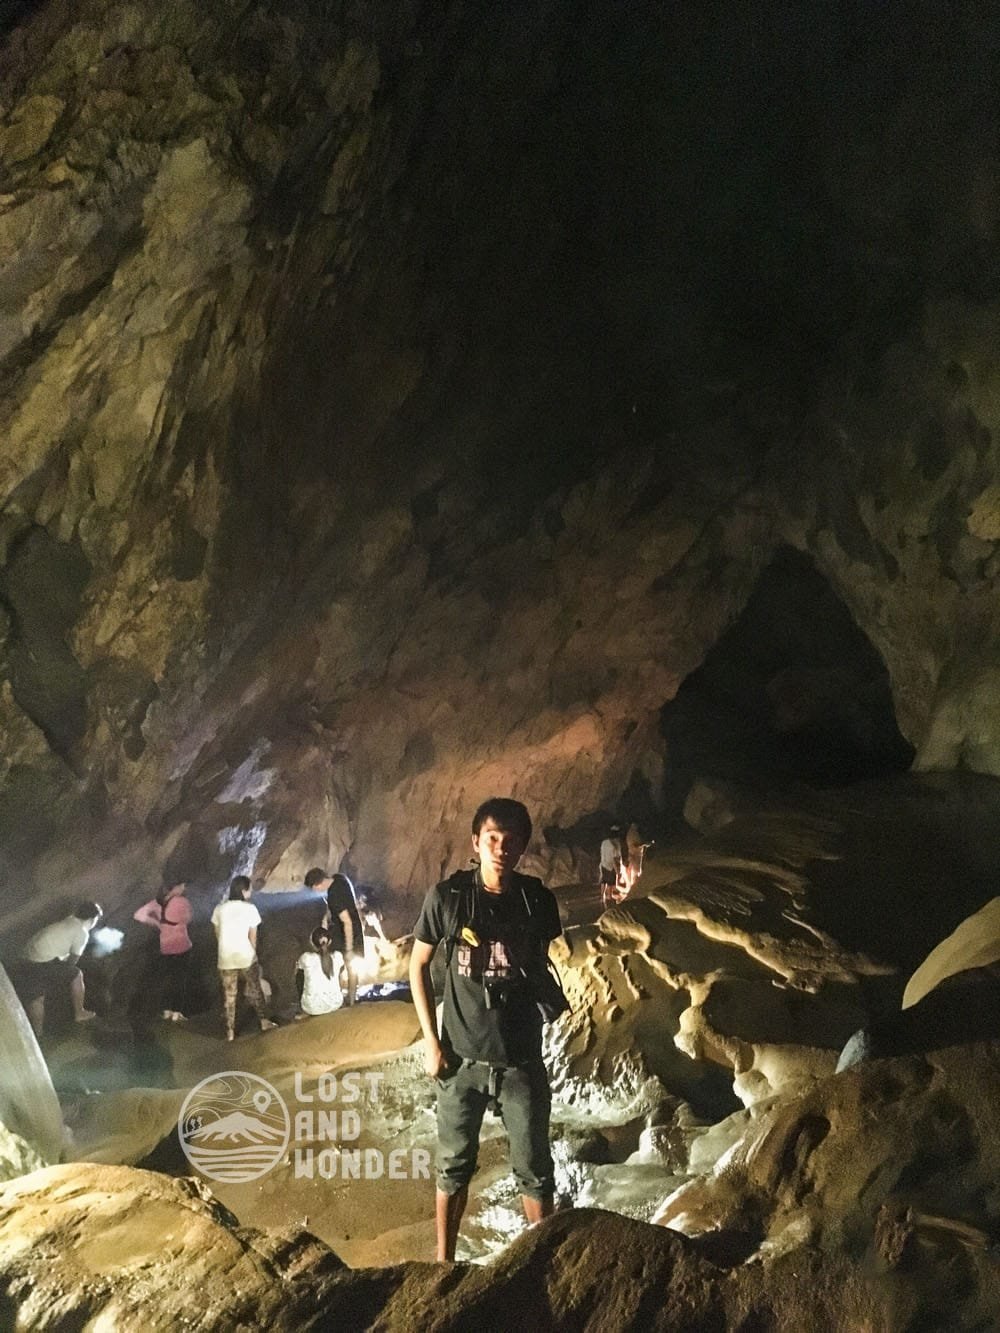 One of the Sumaguing Cave tour guides